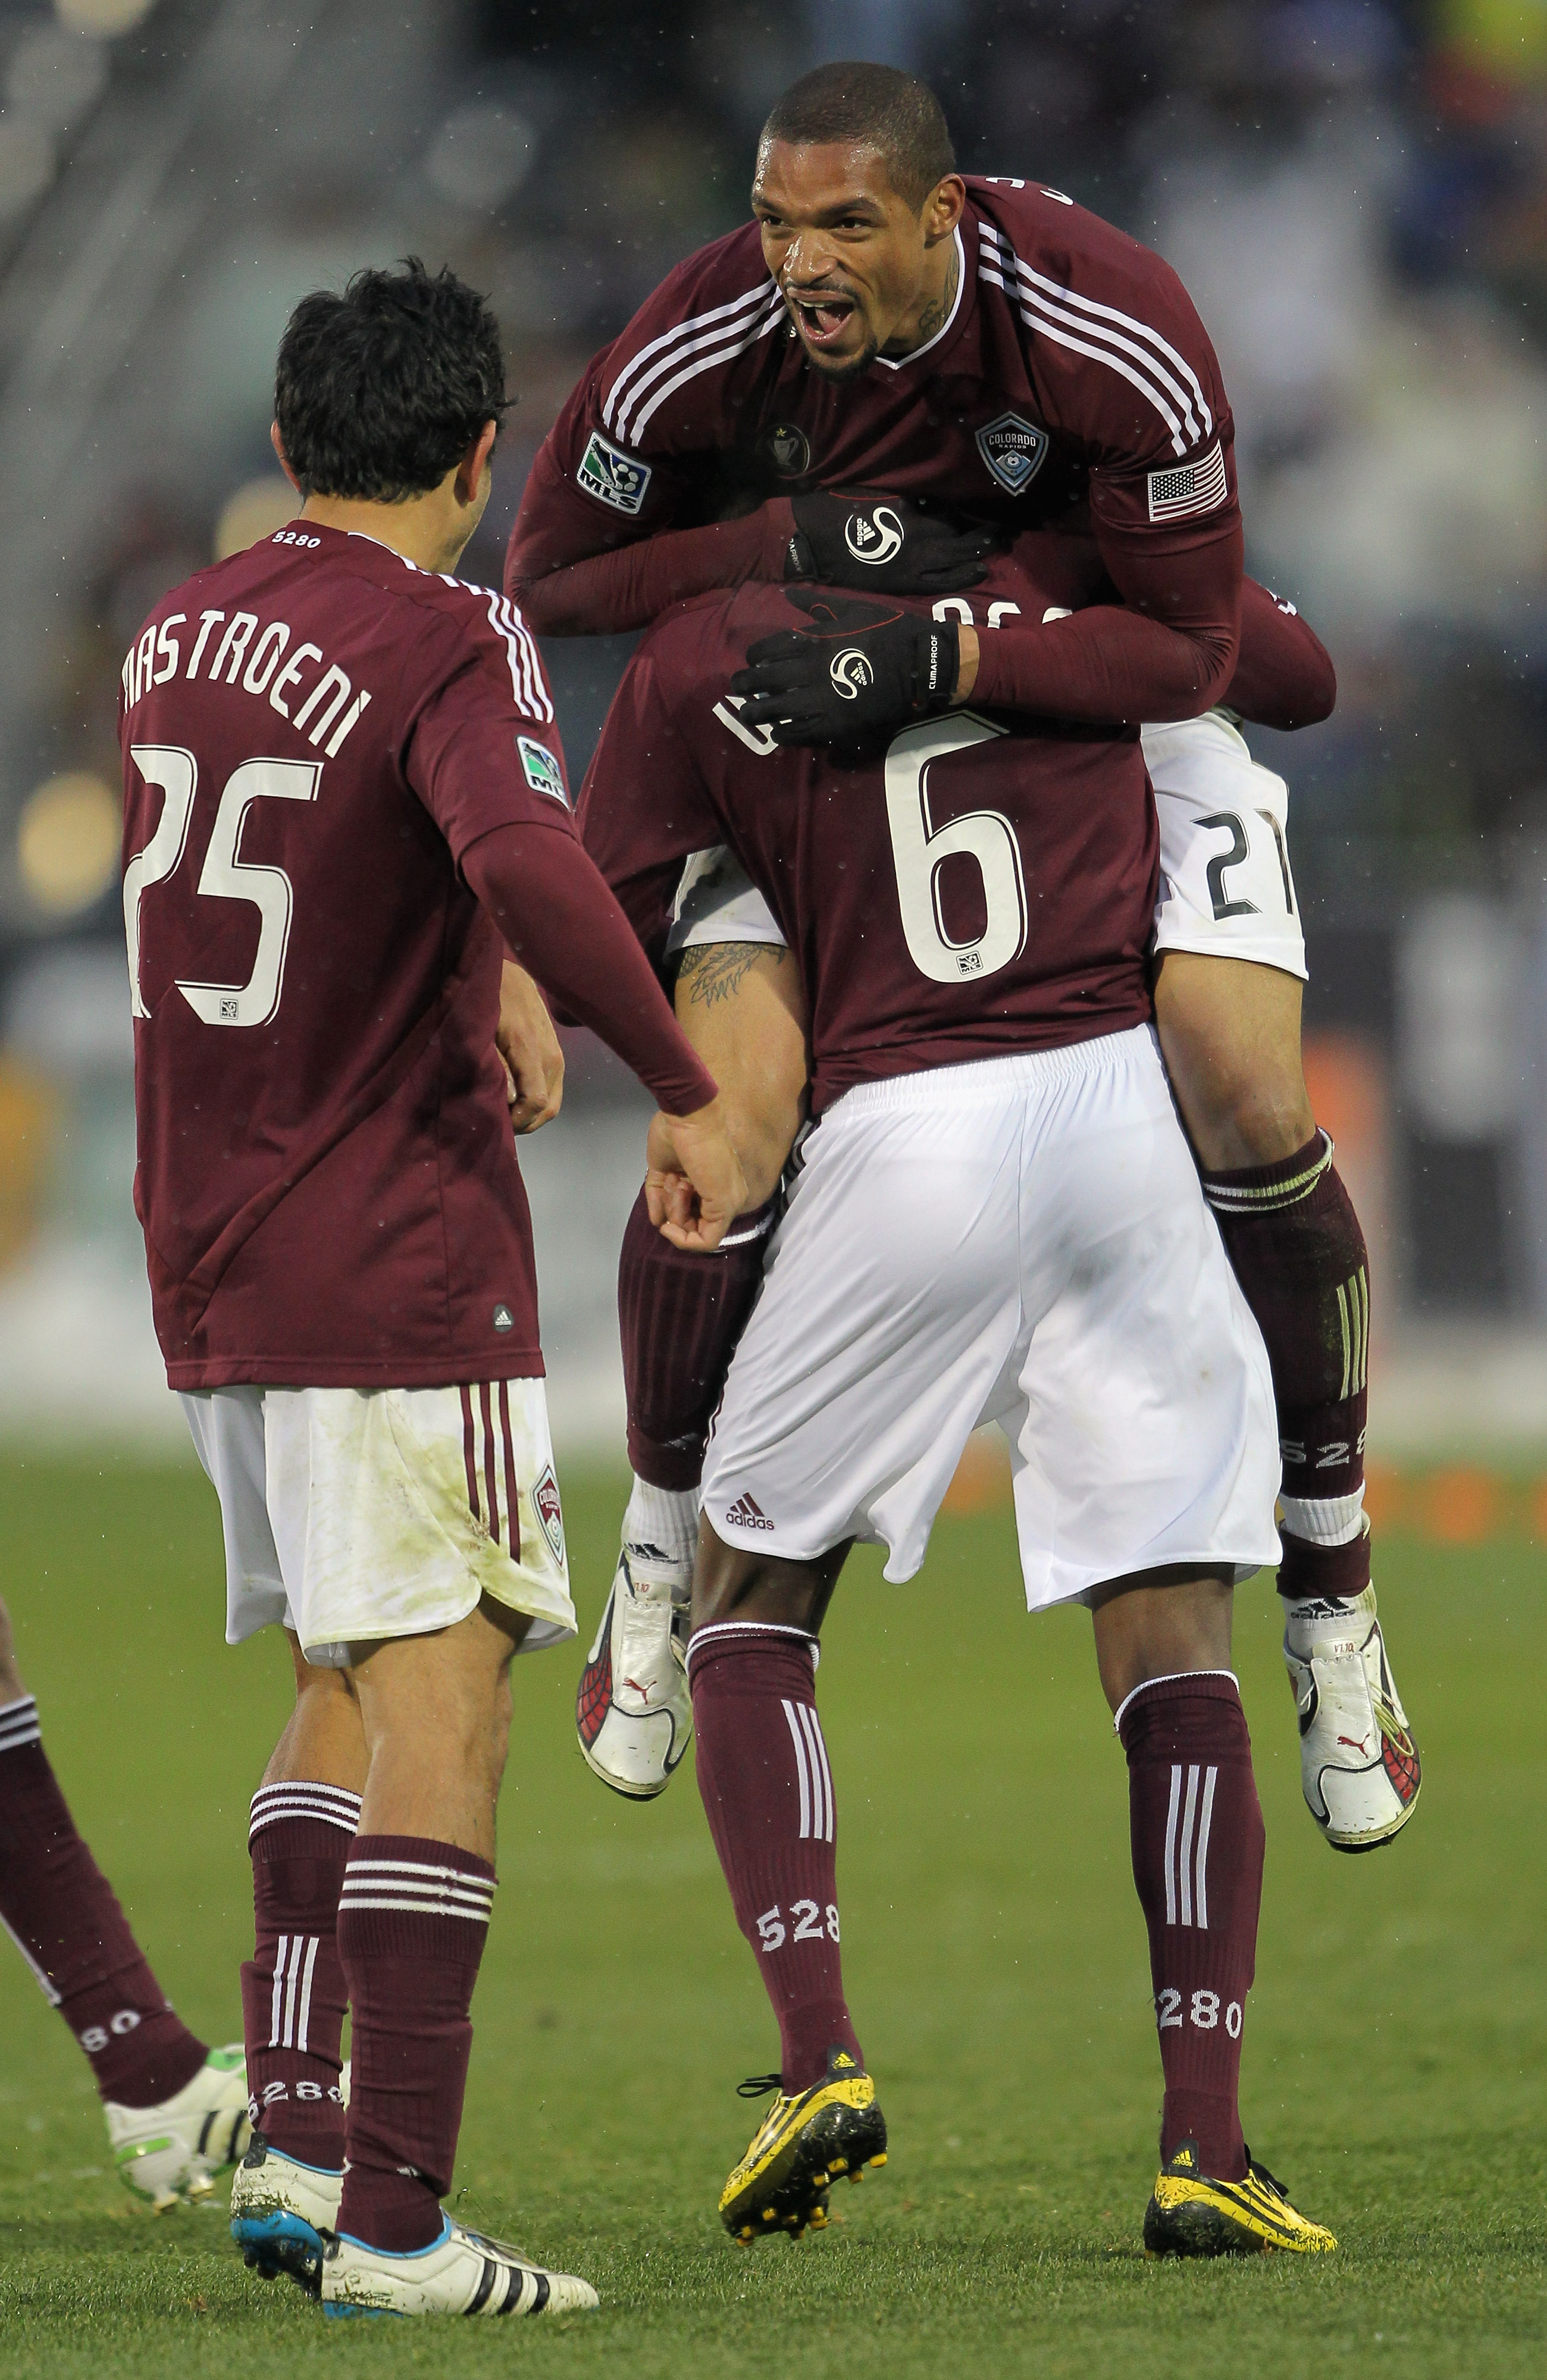 COMMERCE CITY, CO - APRIL 03:  Caleb Folan #21 of the Colorado Rapids is lifted up by Anthony Wallace #6 as Pablo Mastroeni #25 watches as they celebrate Folan's goal in the 81st minute against D.C. United at Dick's Sporting Goods Park on April 3, 2011 in